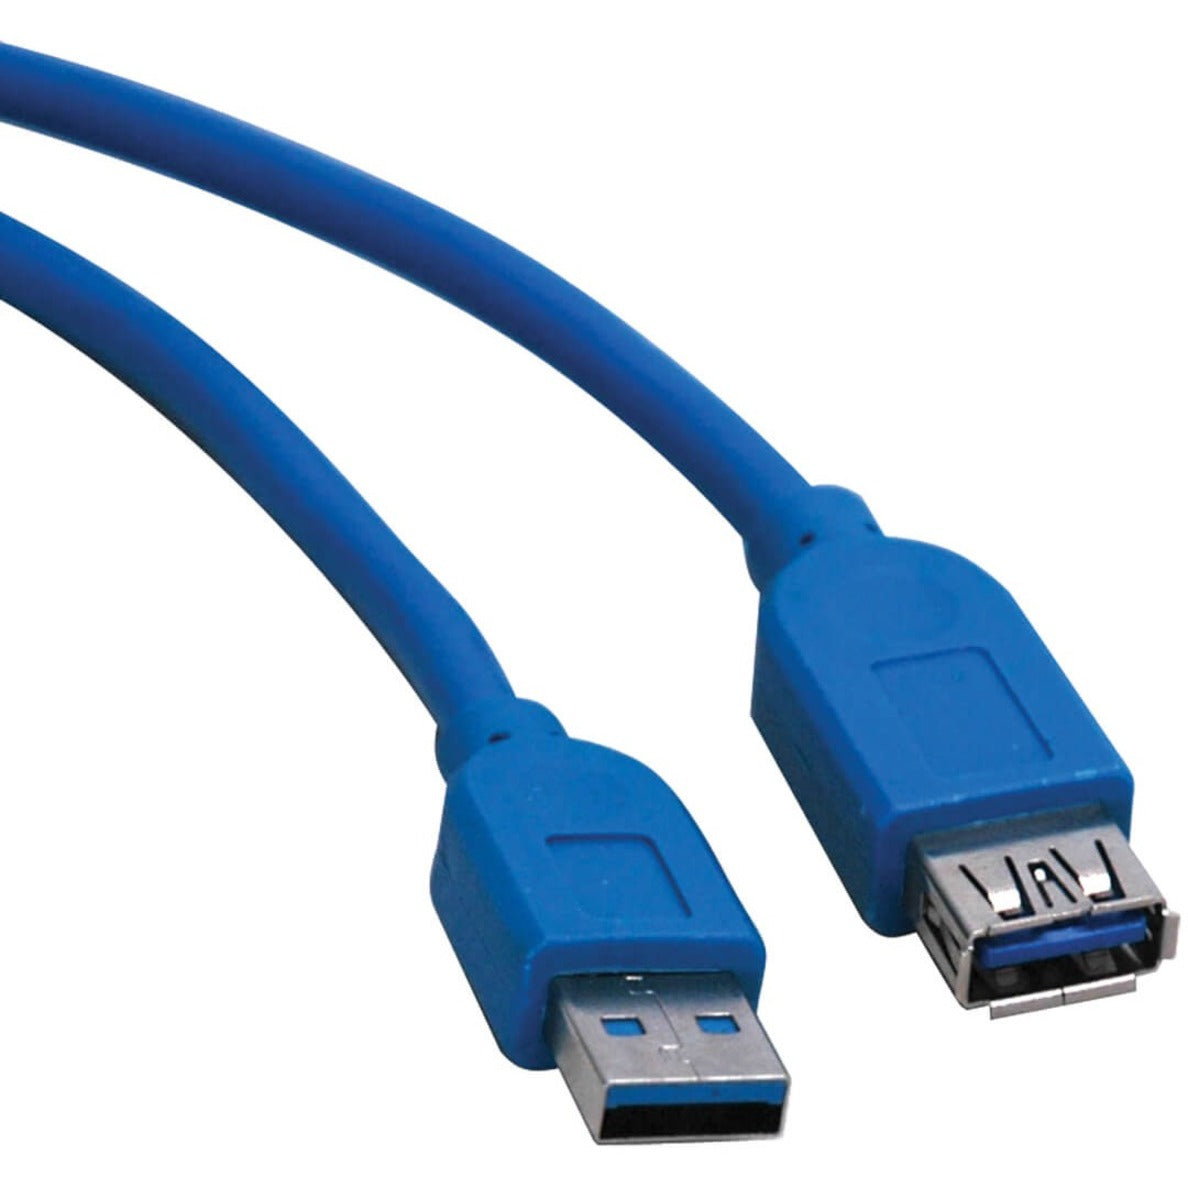 Tripp Lite U324-016 USB 3.0 SuperSpeed Extension Cable, USB-A to USB-A, M/F, Blue, 16 ft